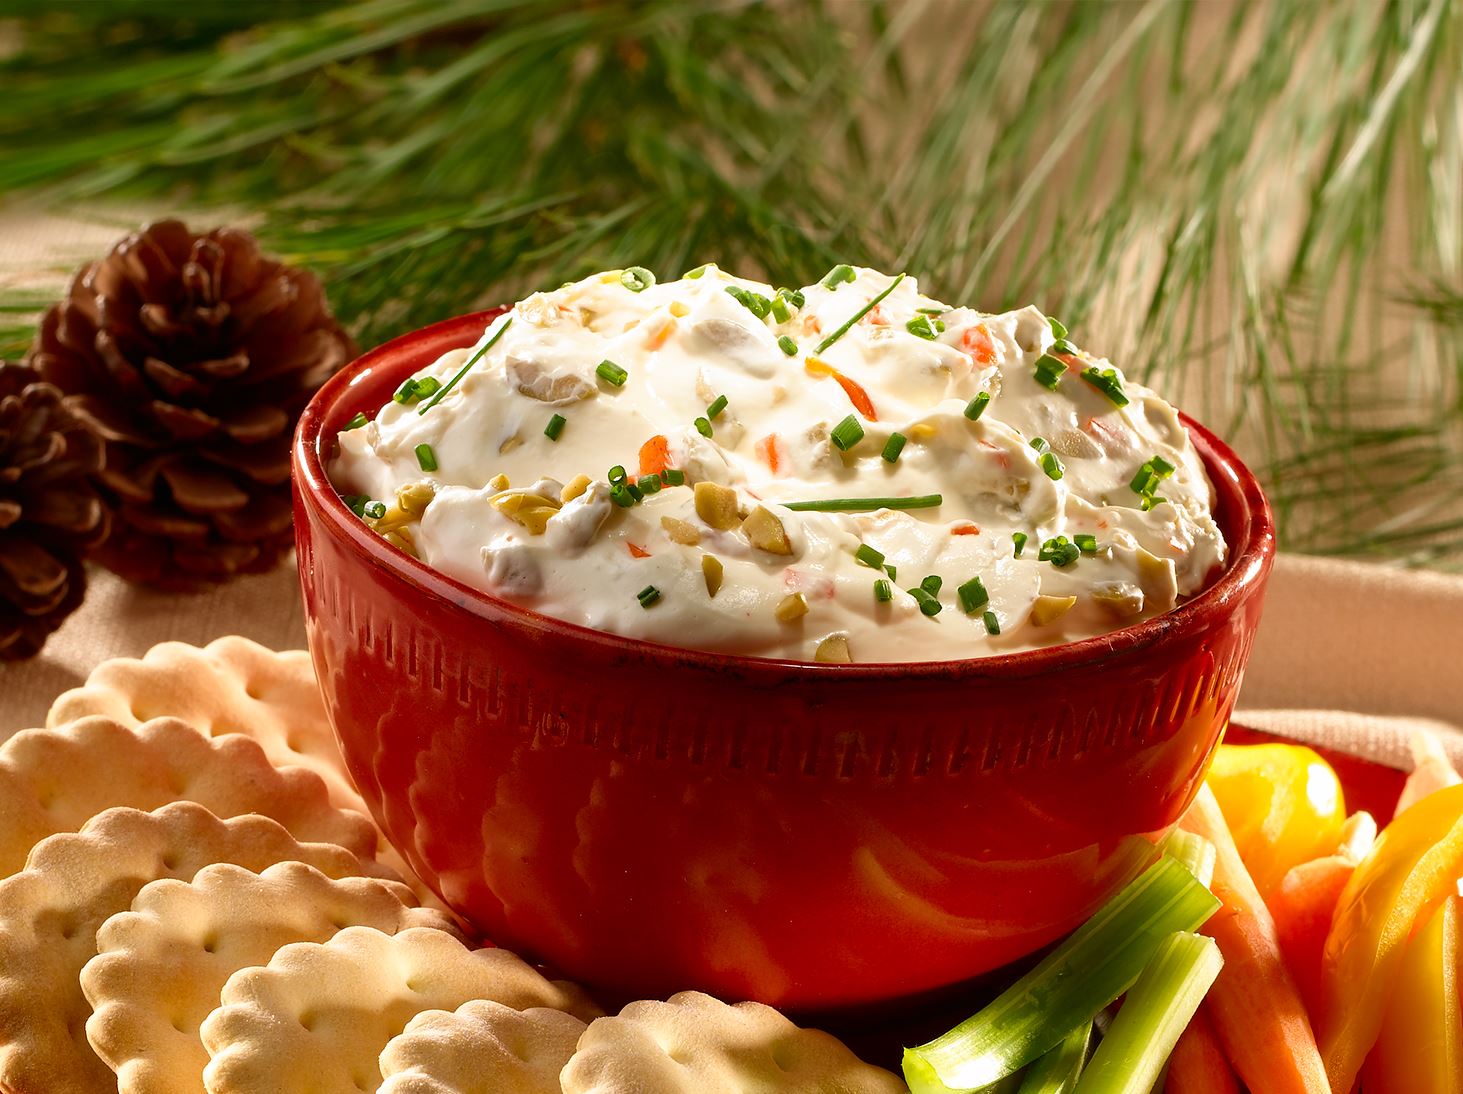 Creamy Olive Dip with Spanish Olives